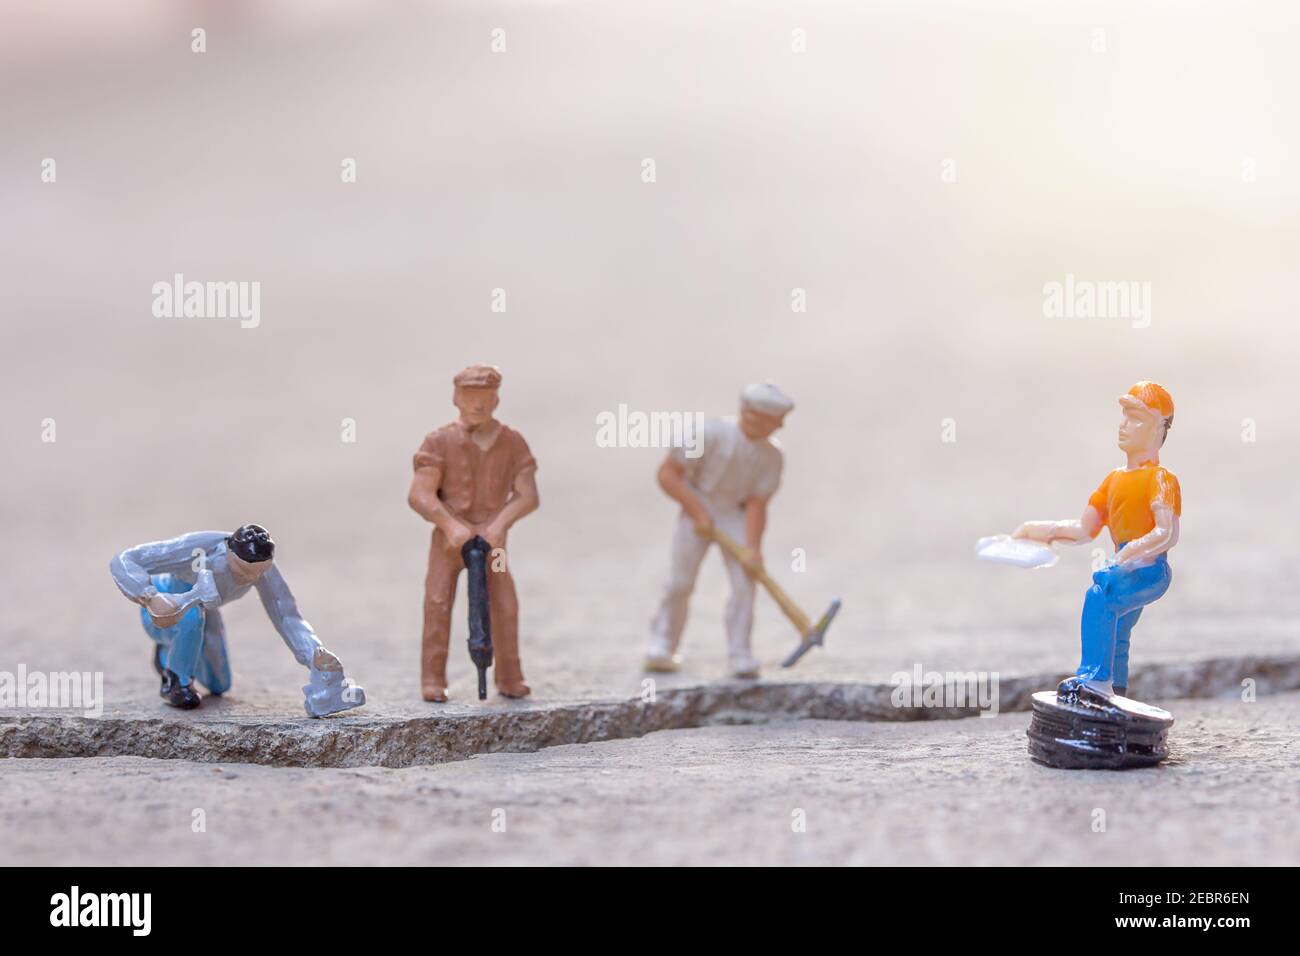 Miniature people- Figures construction worker, is working on a cracked area with blurred background and sunlight.Business and construction concept. Stock Photo